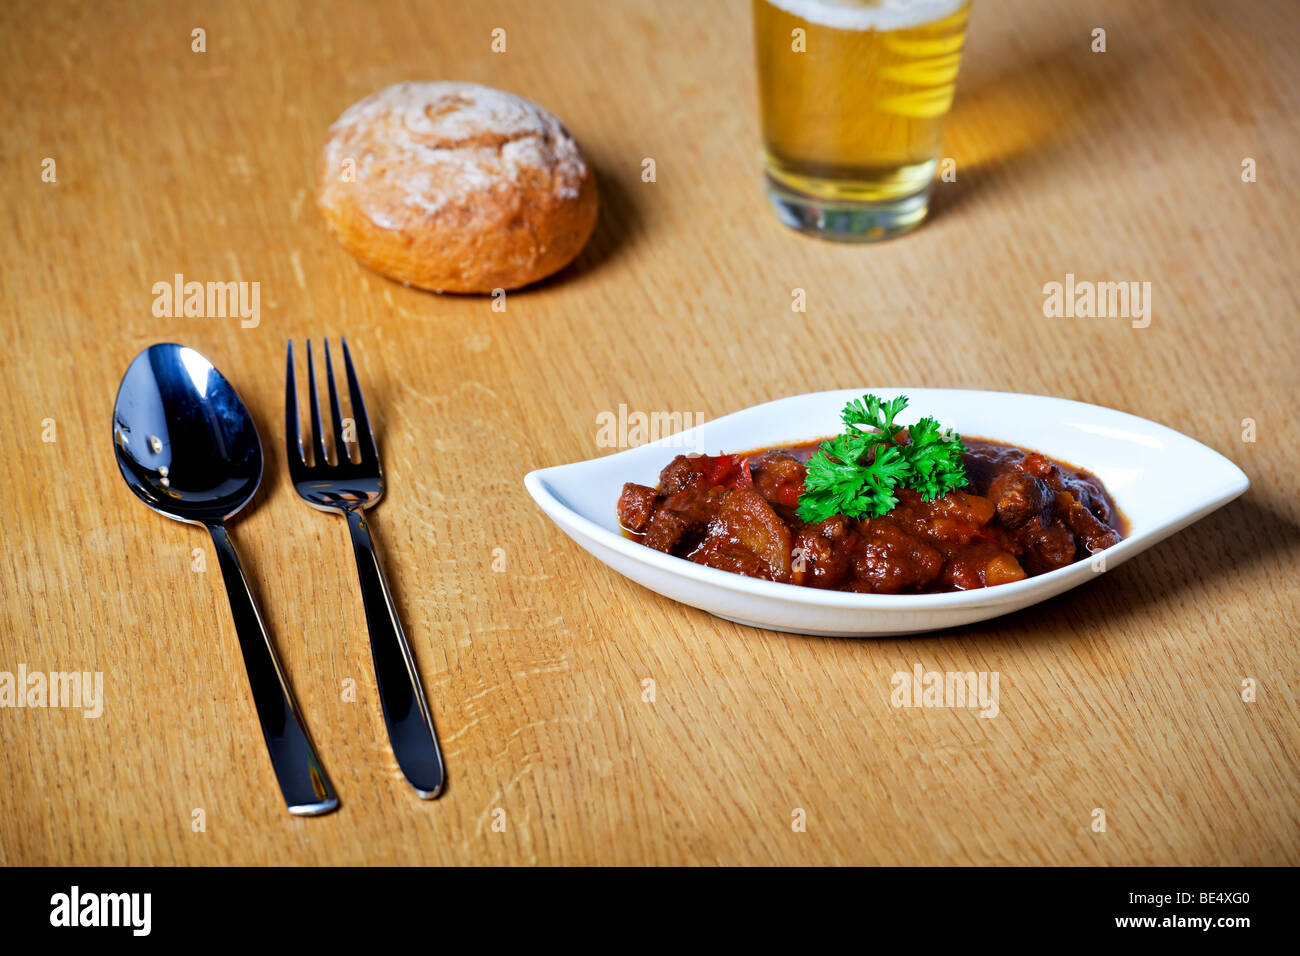 hungarian goulash and a glass of beer Stock Photo